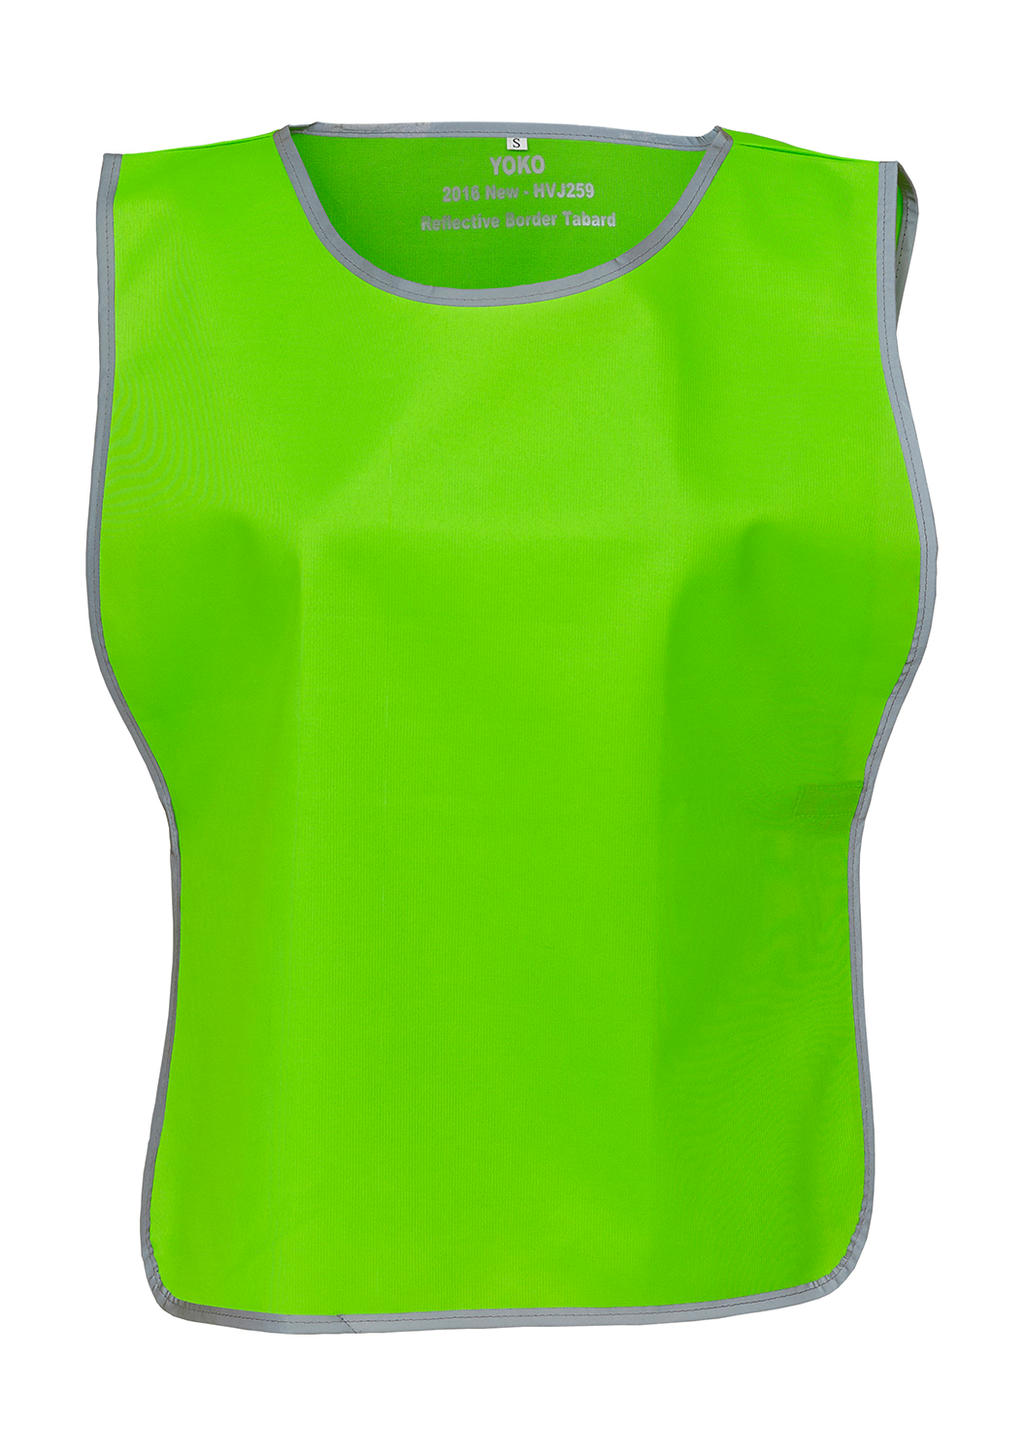  Fluo Reflective Border Tabard in Farbe Lime